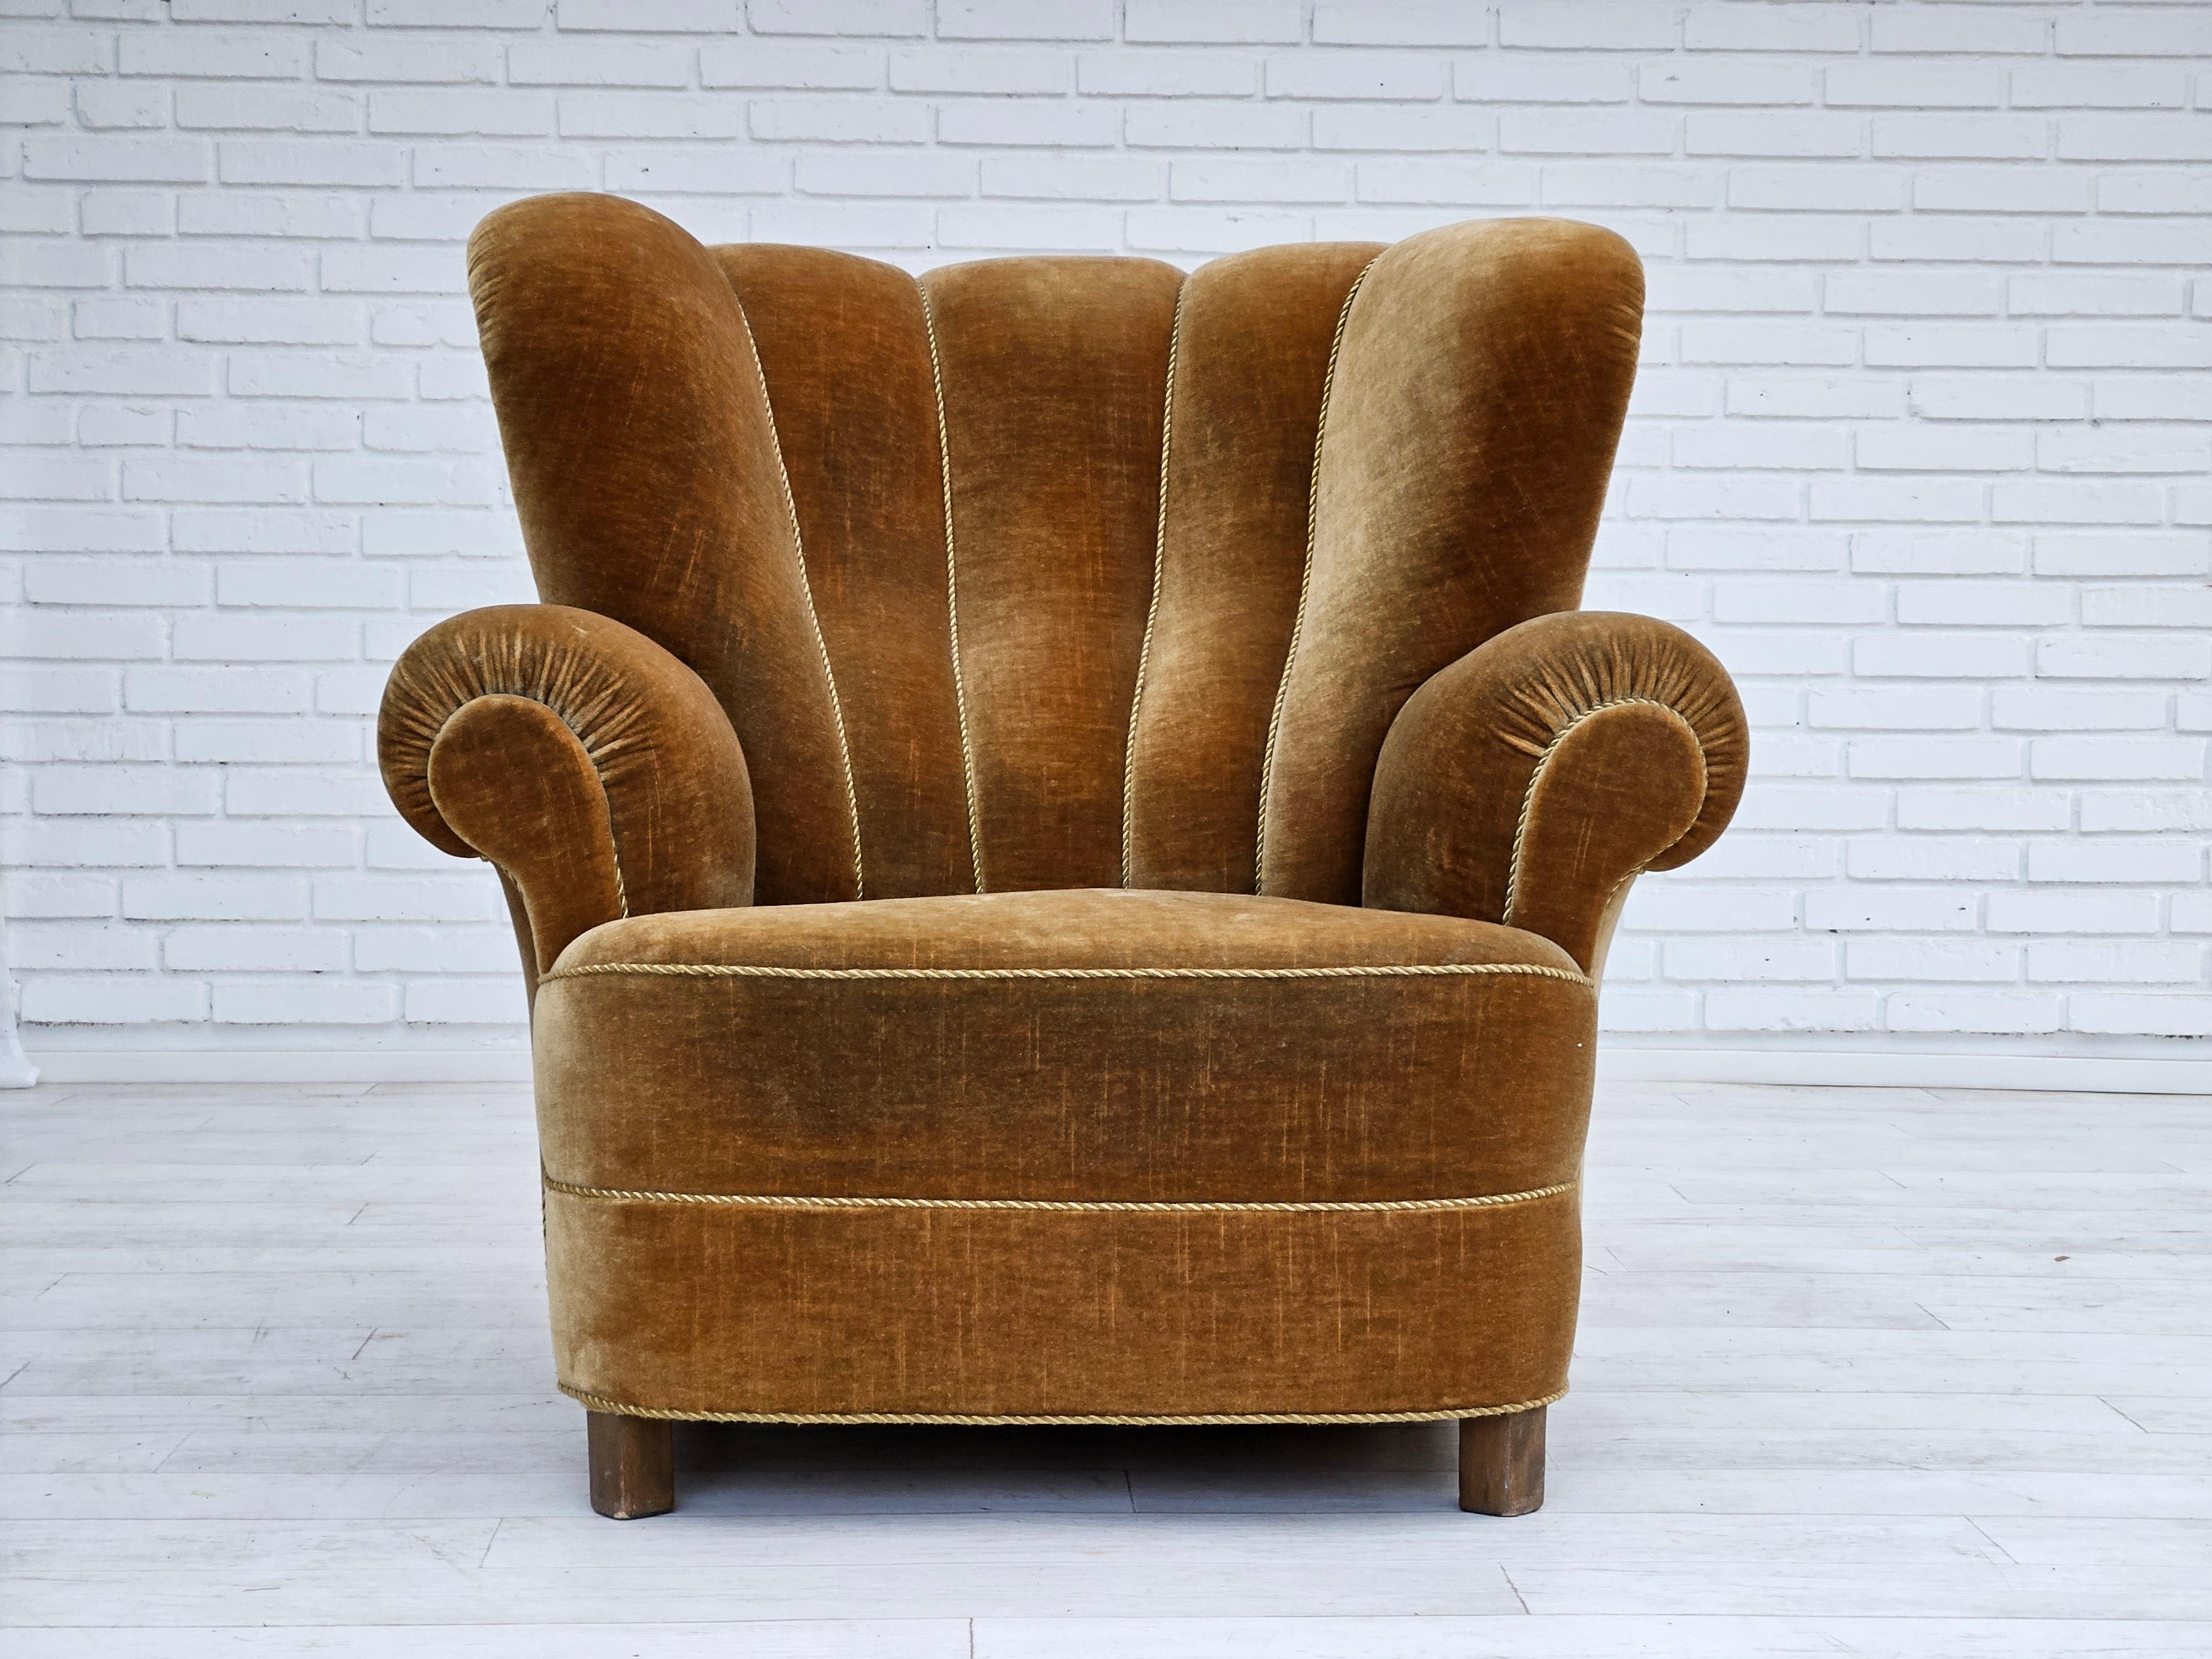 1960s, Danish reclining chair in original very good condition: no smells and no stains. Light green velour, beech wood legs, brass springs in the seat. Very comfortable, big chair, good for sleeping. Manufactured by Danish furniture manufacturer in